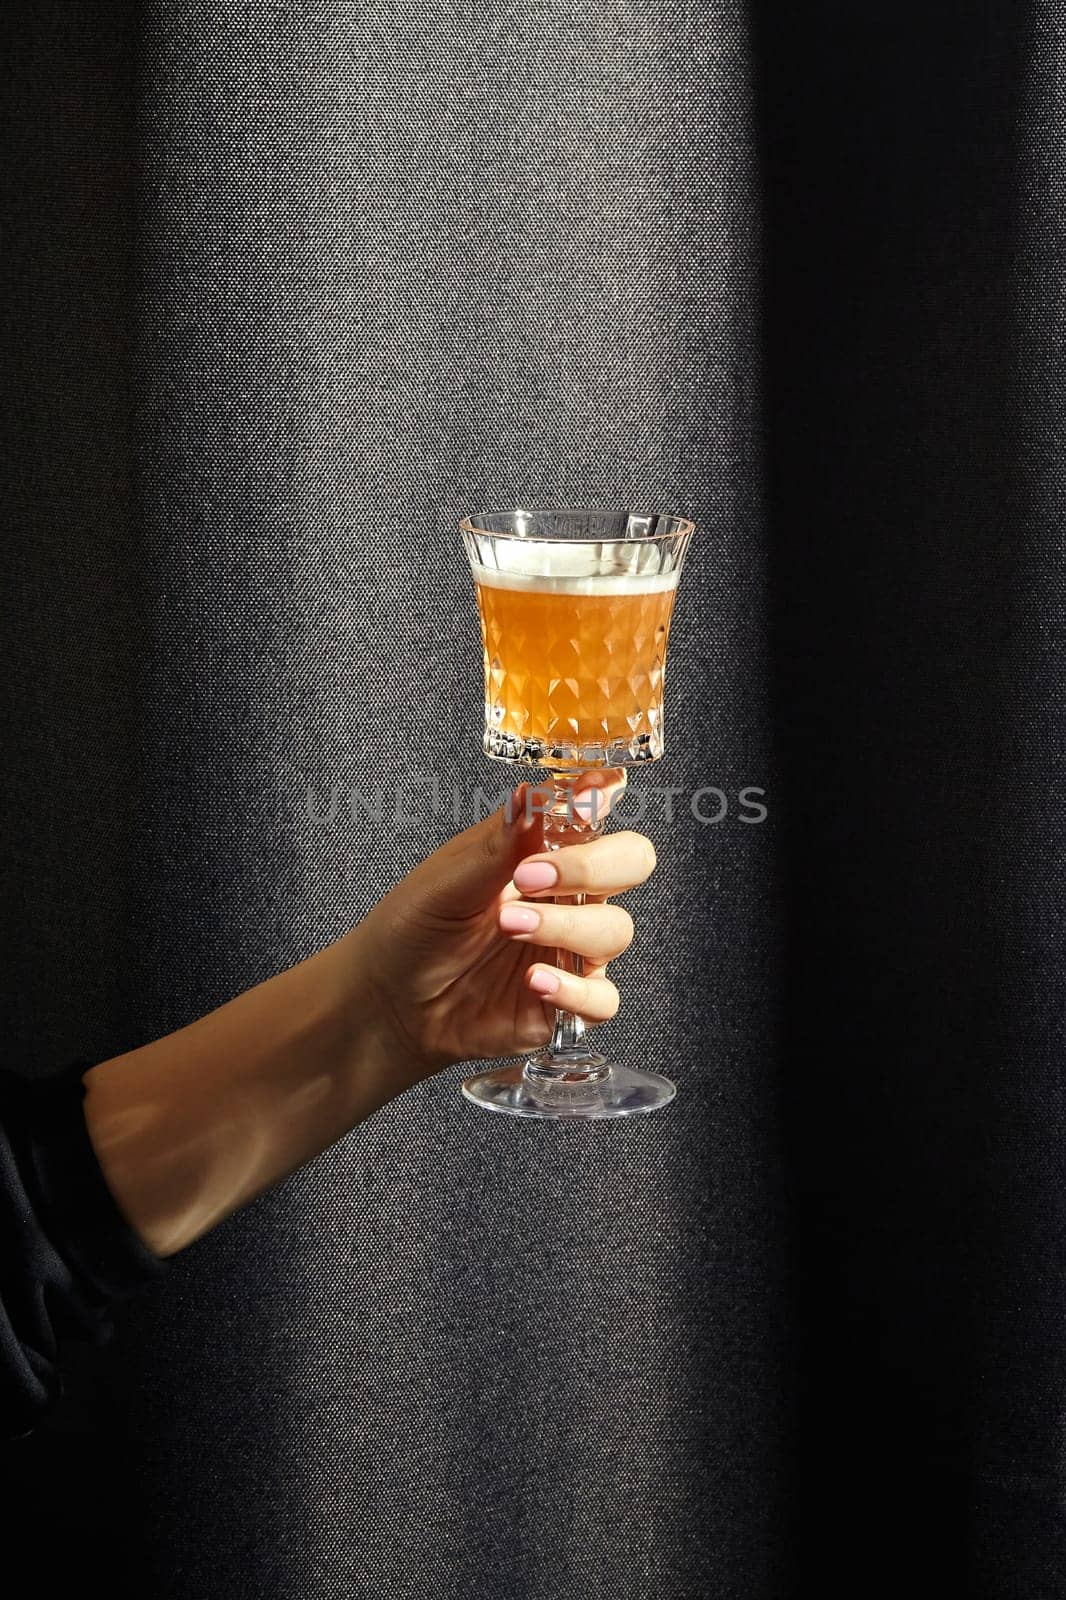 Female hand elegantly holding crystal glass filled with whiskey sour, cocktail in amber hue contrasting with dark textured fabric background